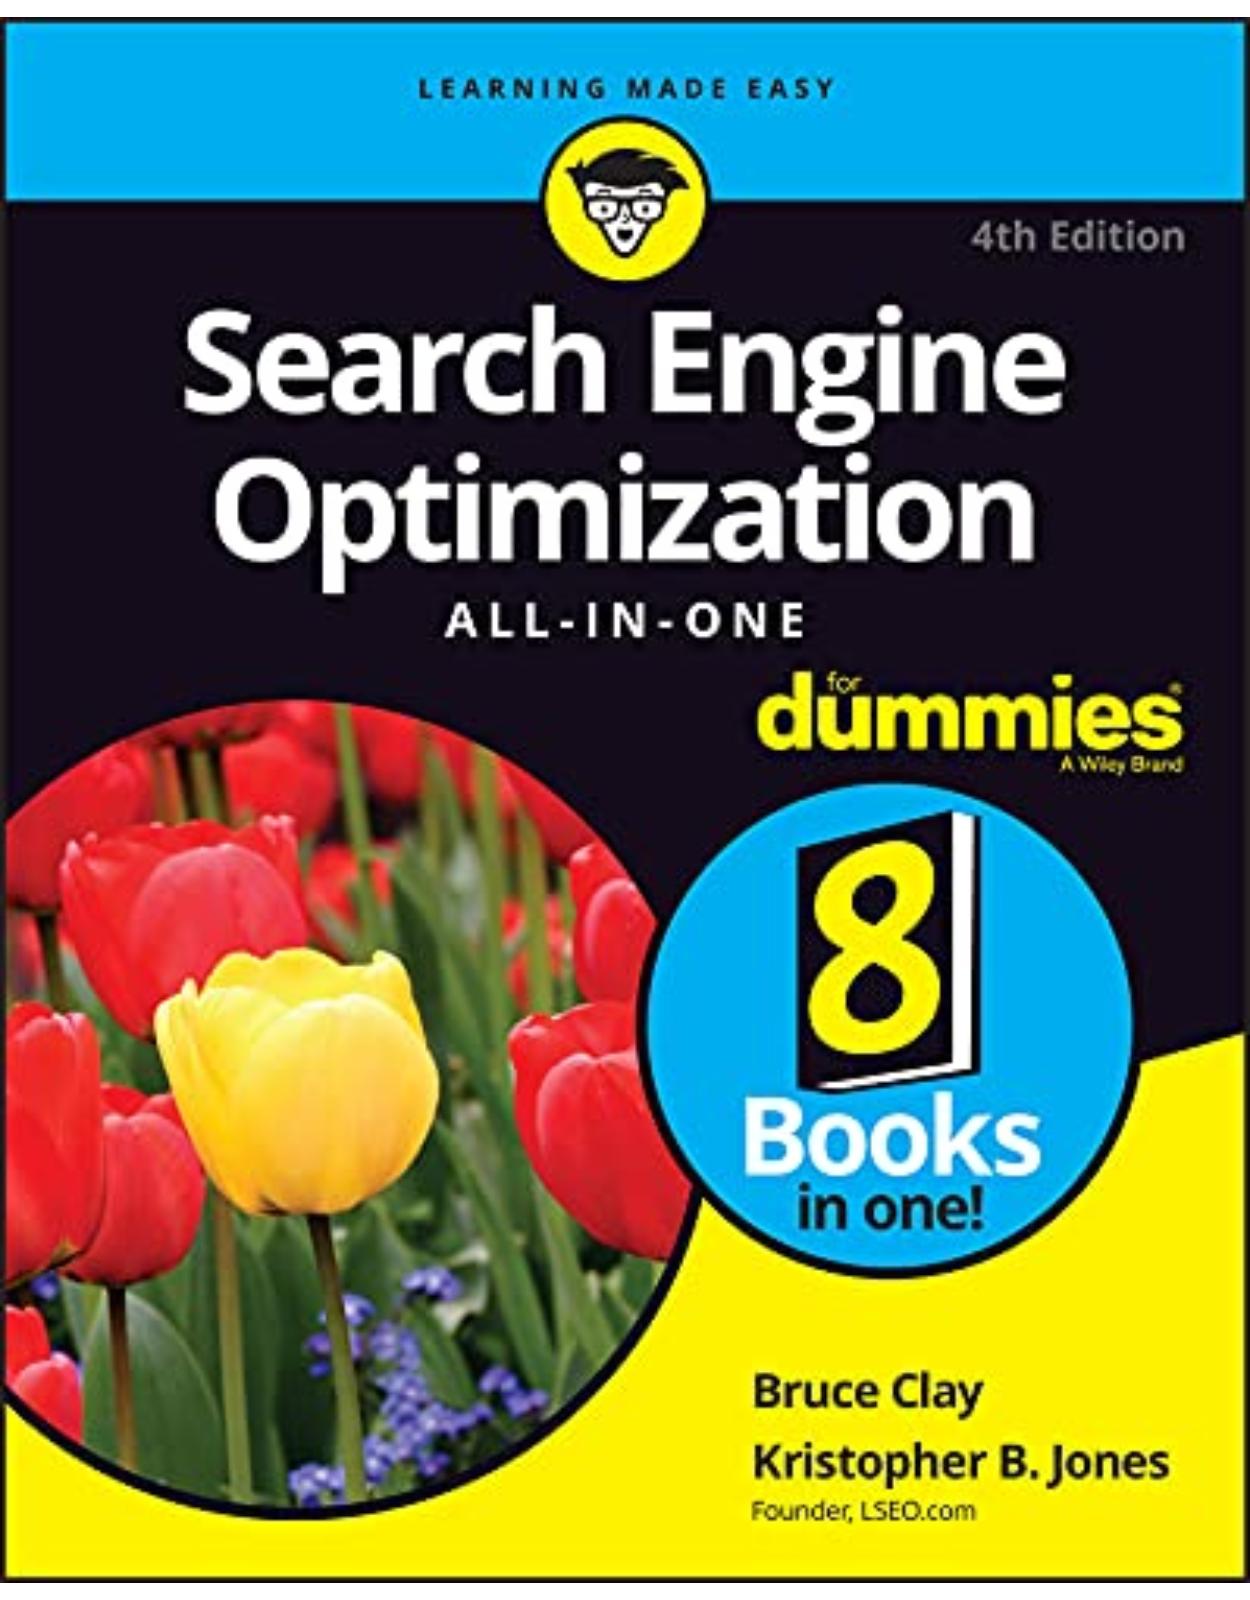 Search Engine Optimization All–in–One For Dummies, 4th Edition